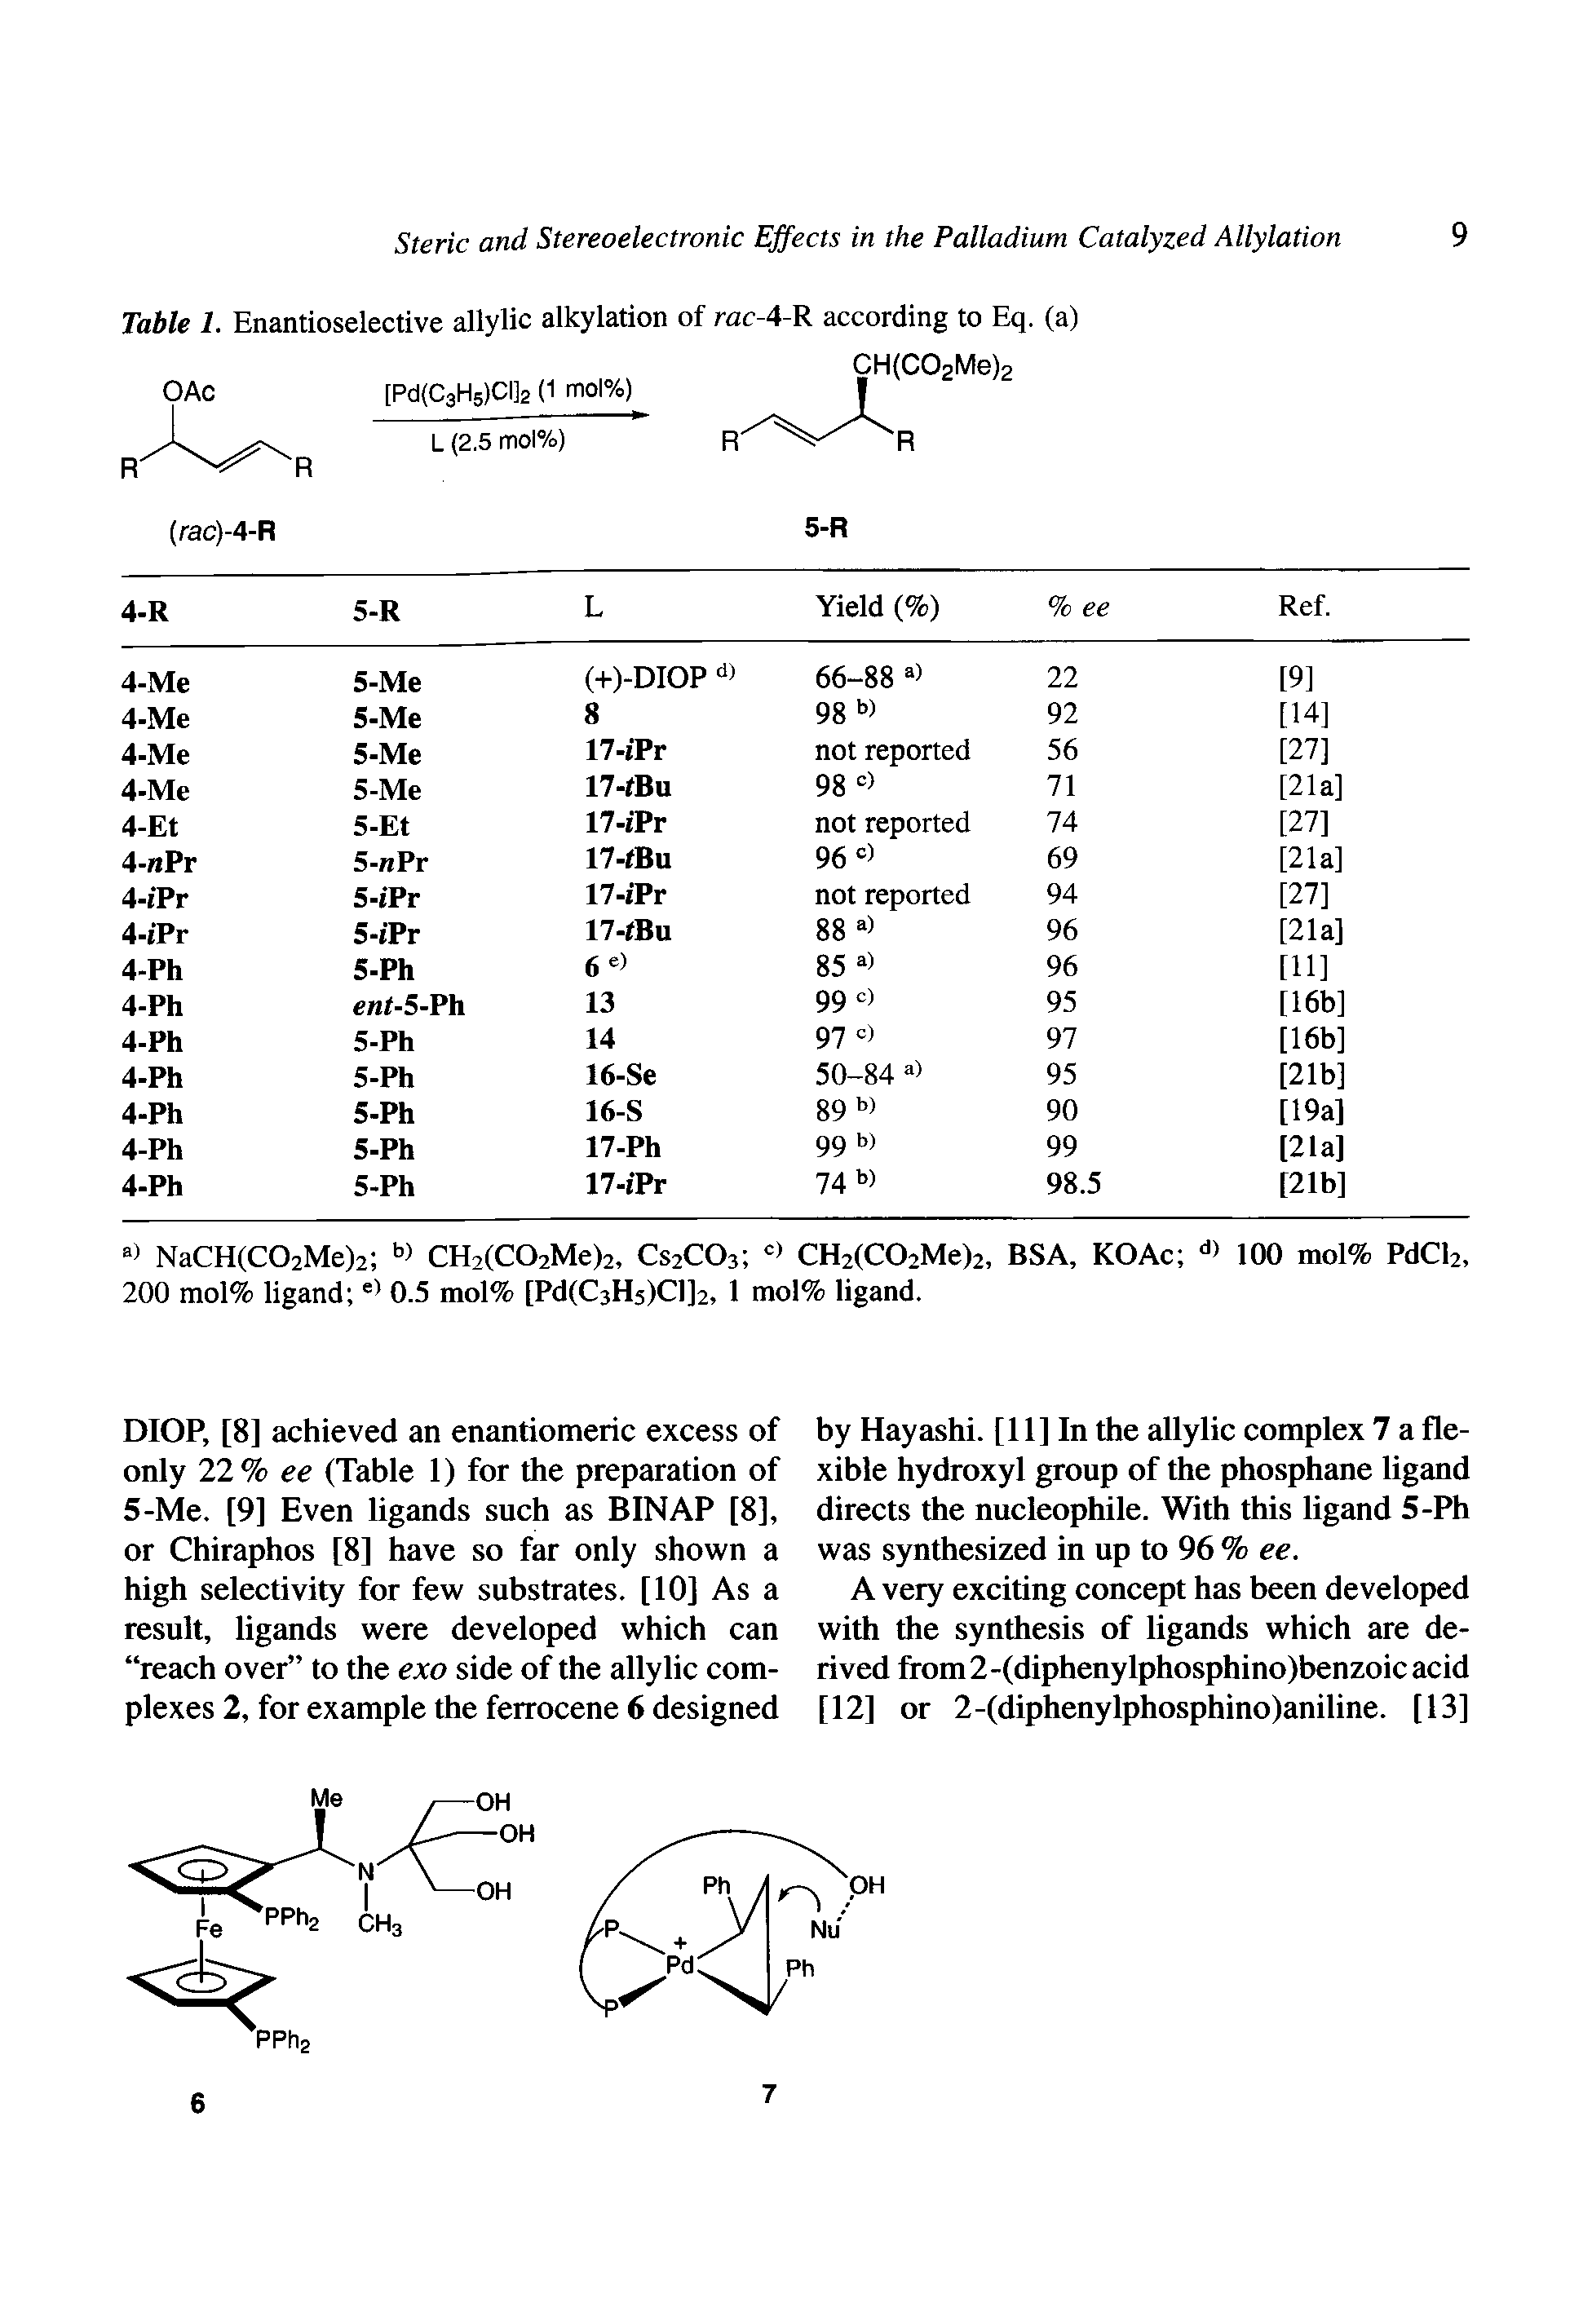 Table 1. Enantioselective allylic alkylation of rac-4-R according to Eq. (a) [PdlCaHslClk (1 mol%)...